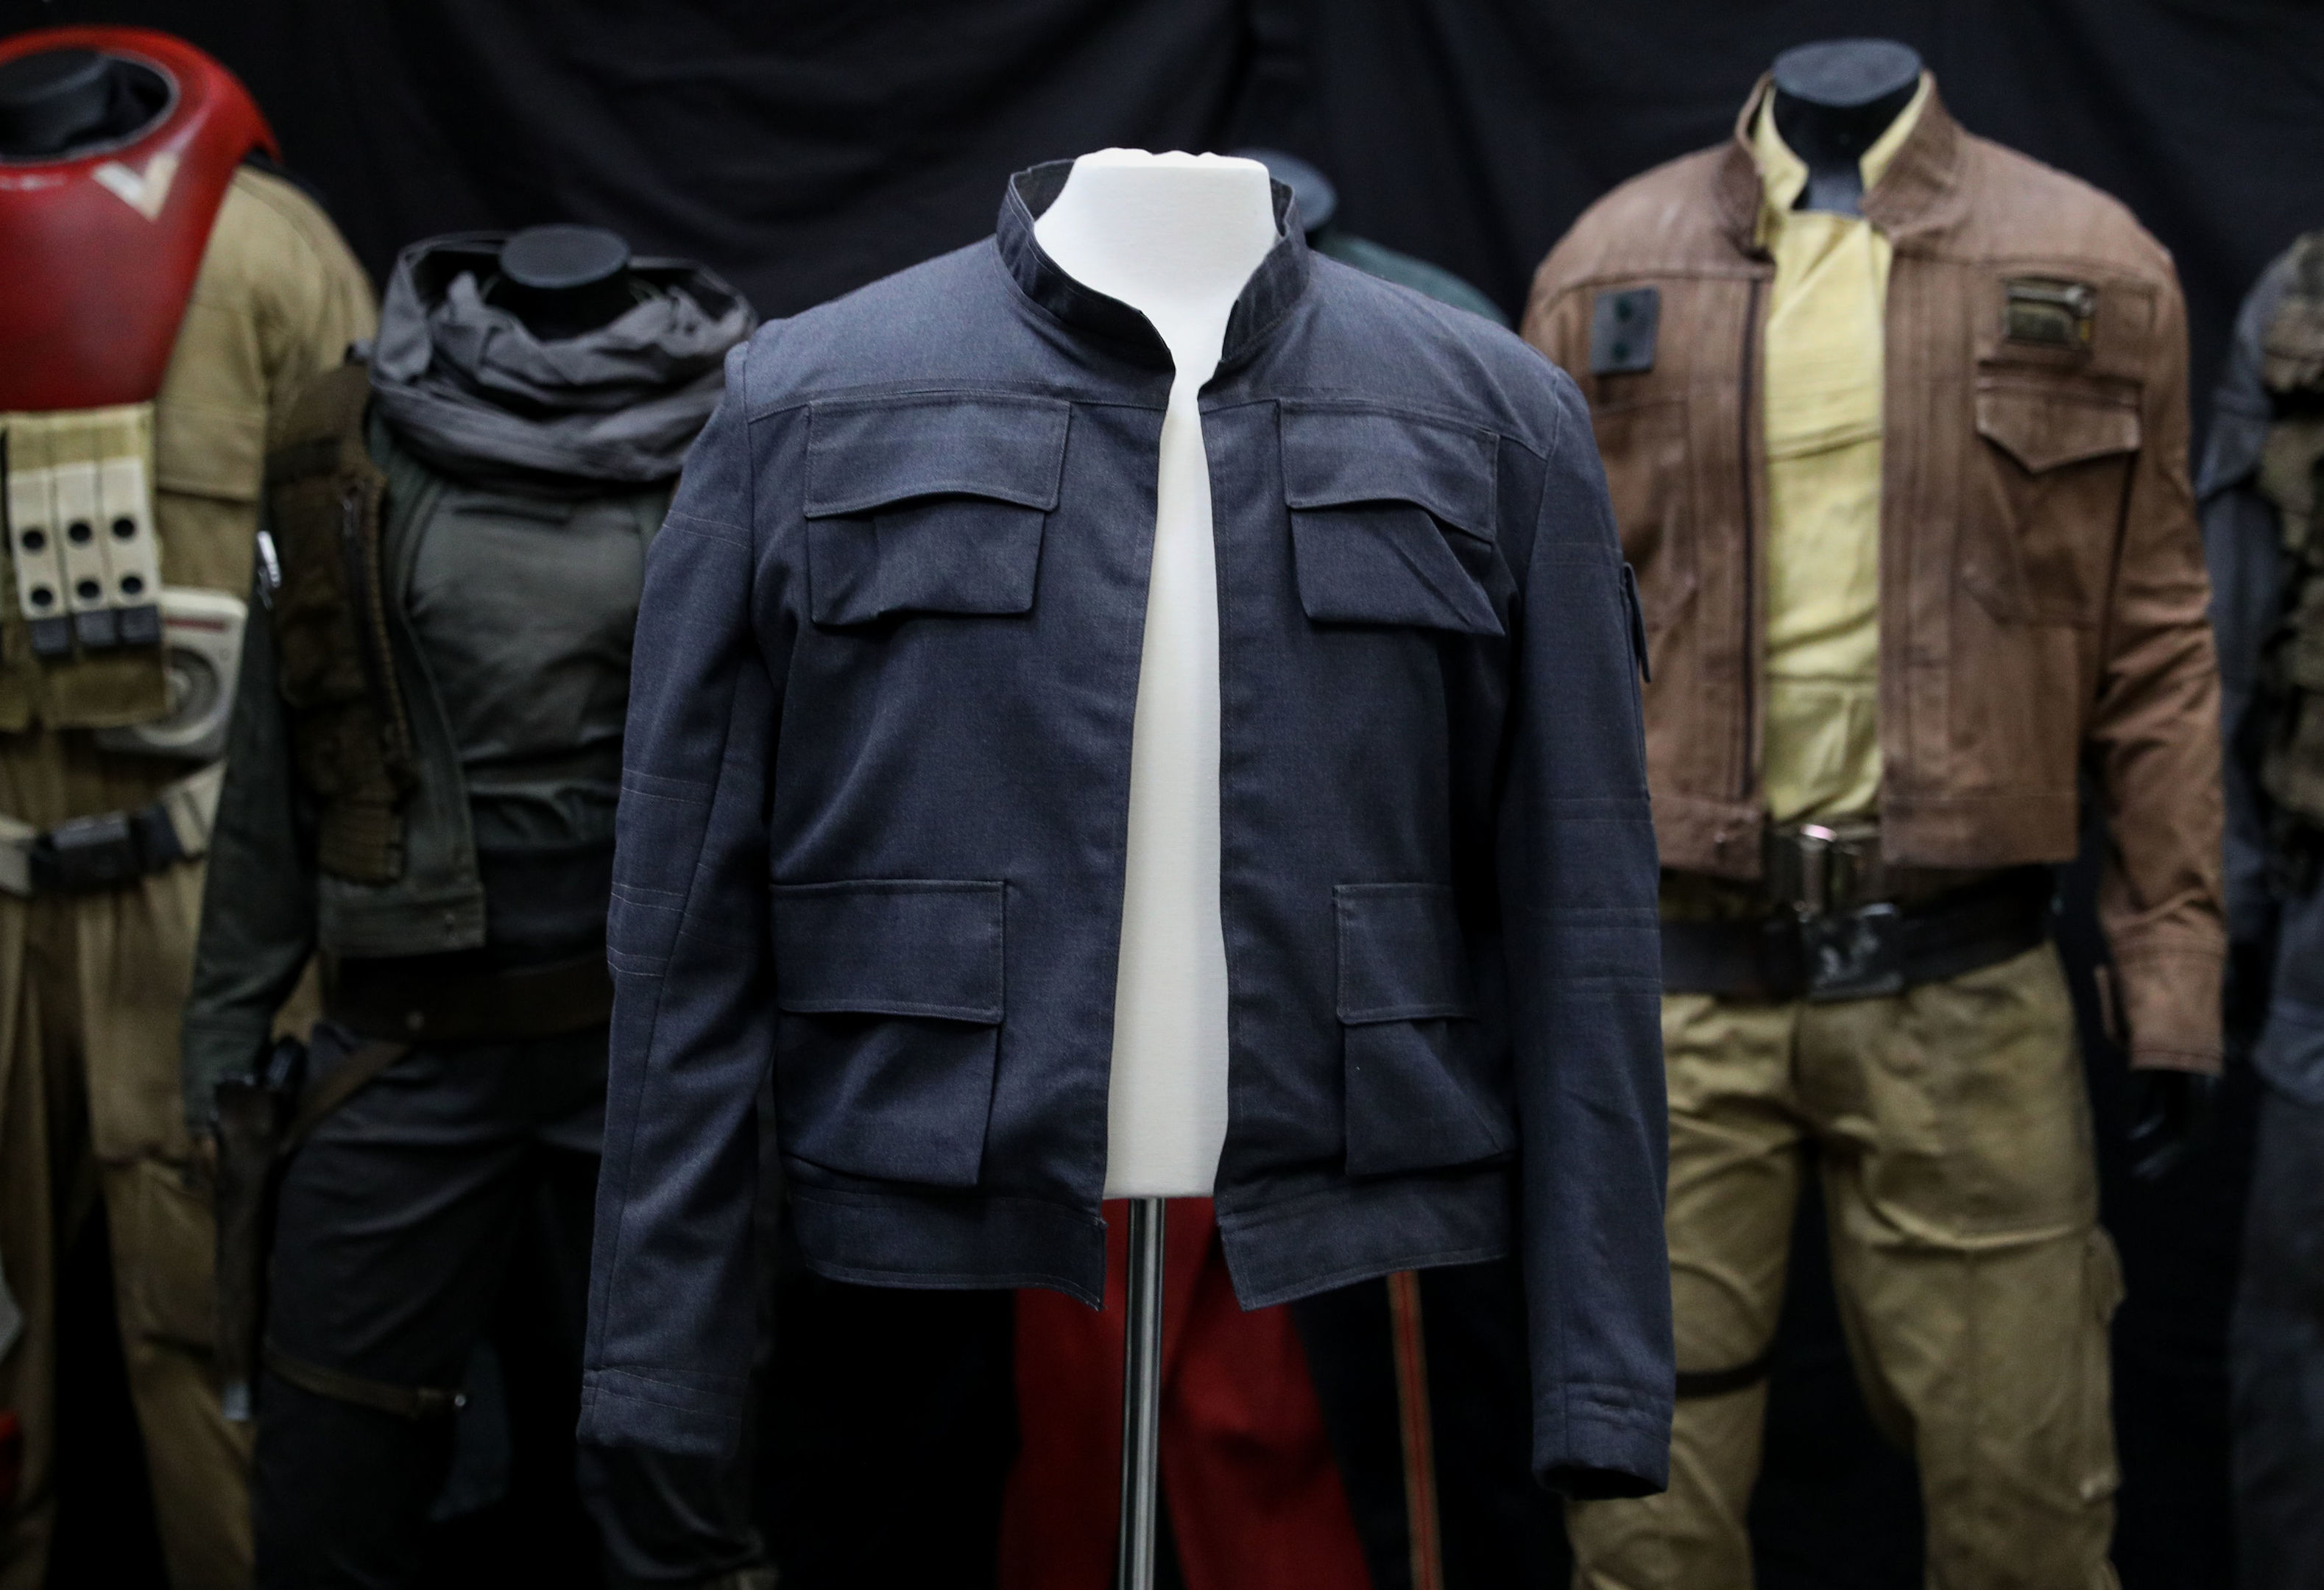 Han Solo's jacket, as worn by Harrison Ford in Star Wars: The Empire Strikes Back on display in front of costumes from Rogue One: A Star Wars Story (Andrew Matthews/PA Wire)